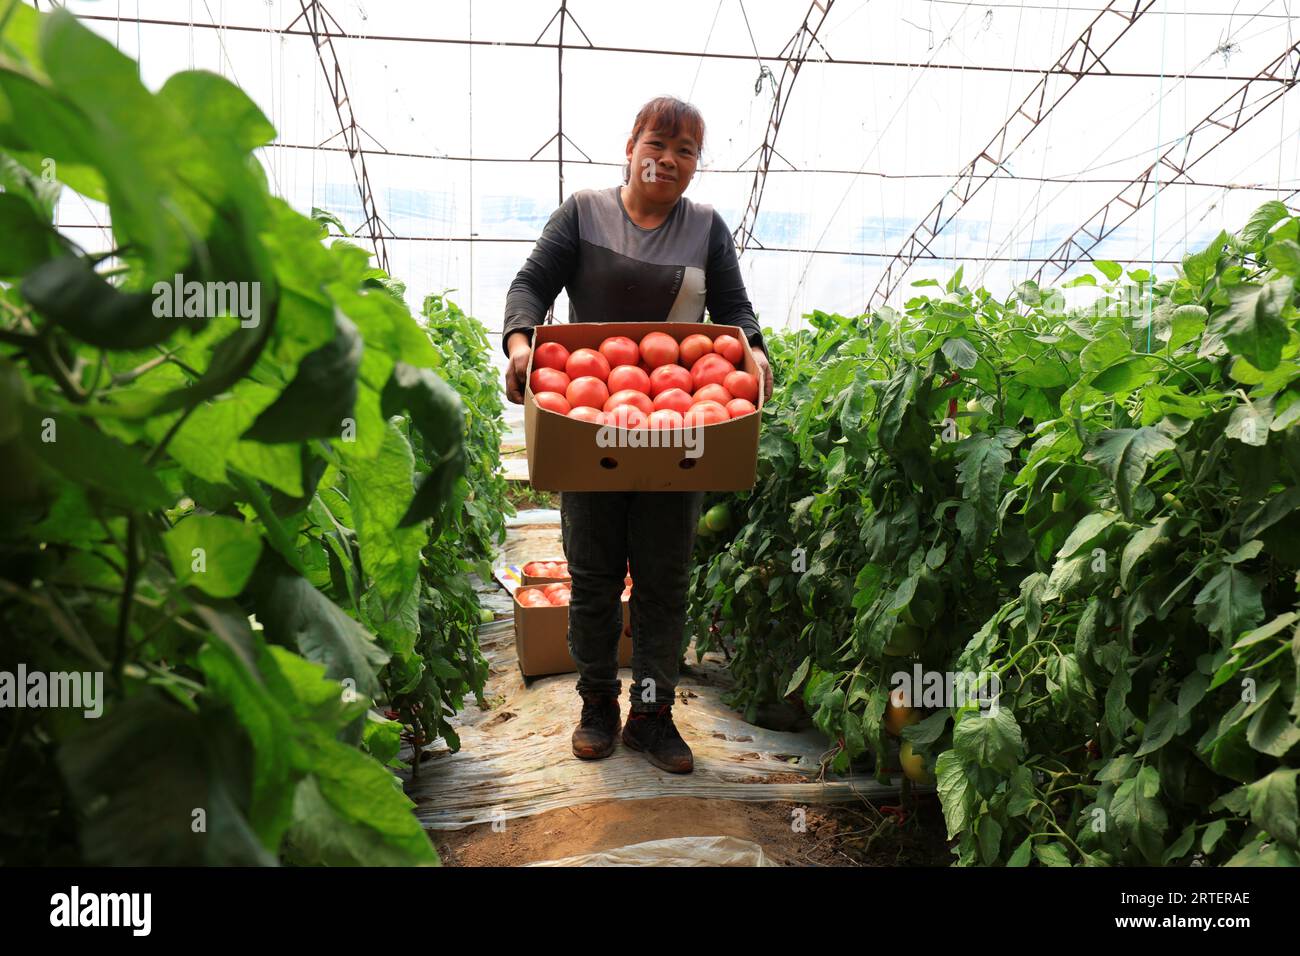 LUANNAN COUNTY, Hebei Province, China - April 29, 2019: A lady is picking tomatoes in the greenhouse. Stock Photo